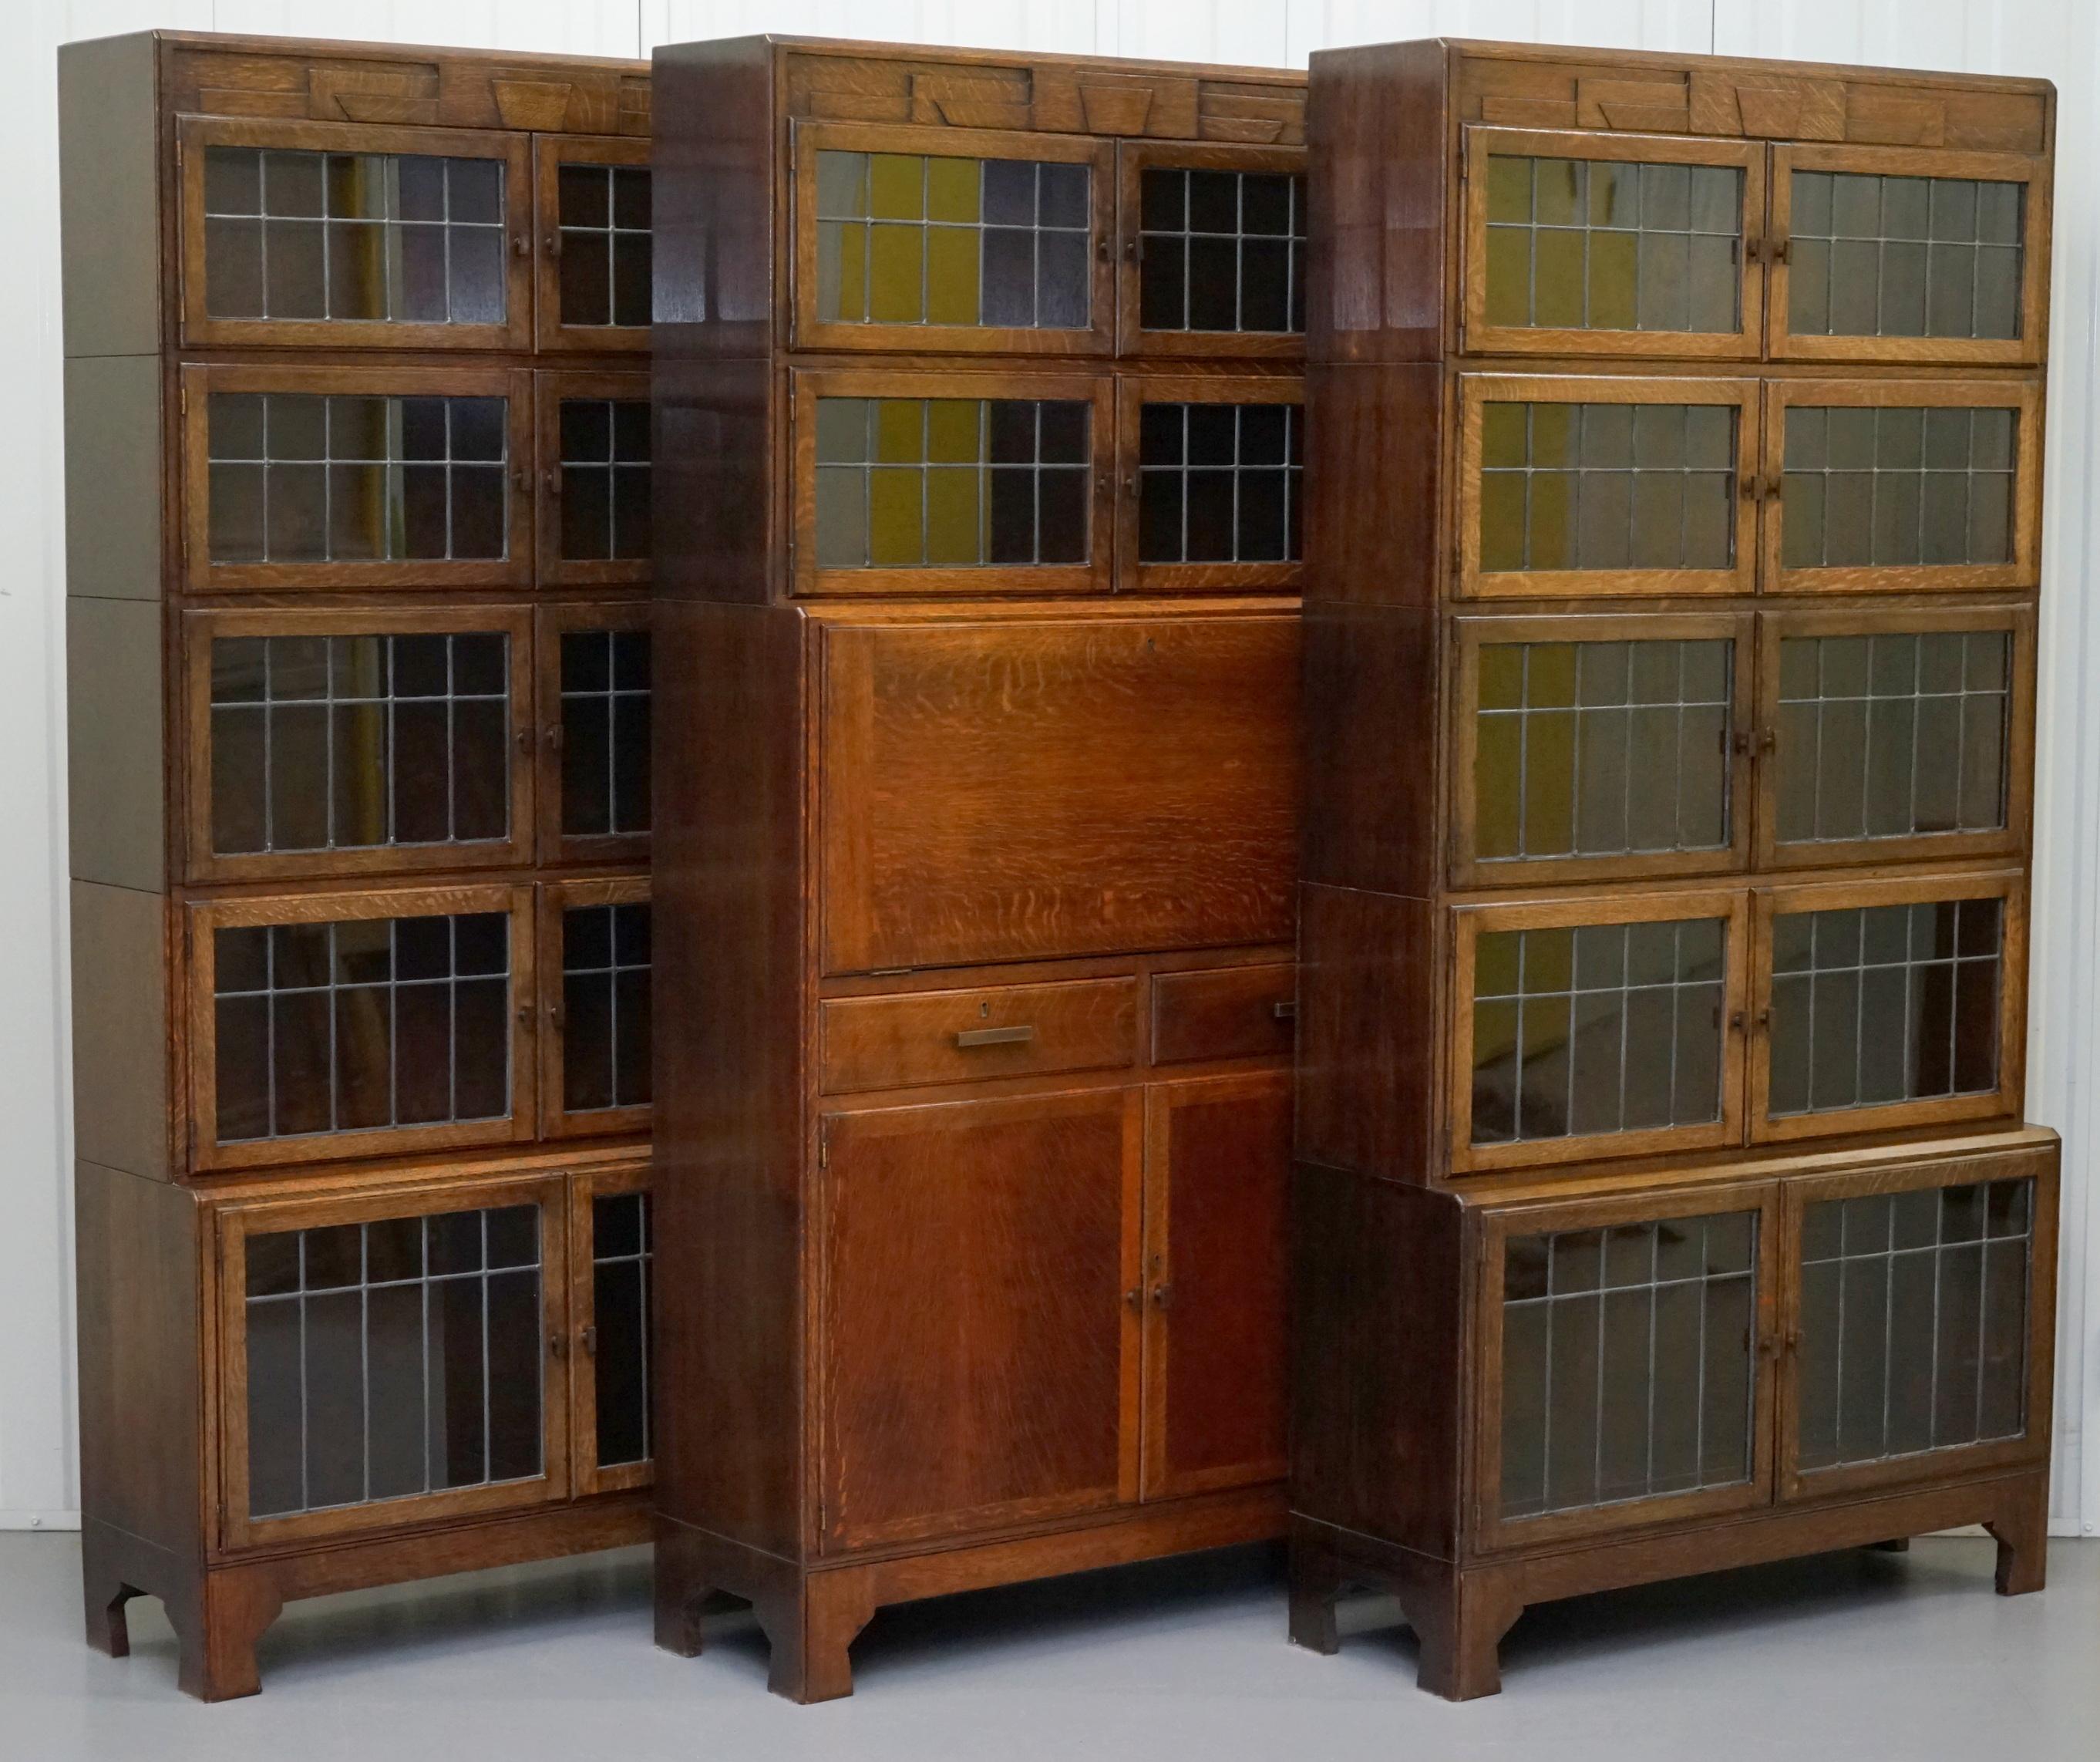 We are delighted to this very rare circa 1900 suite of three Minty Oxford golden oak stacking modular library legal bookcases

This is an exceptionally rare find, firstly if you are not familiar with stacking bookcases each section can be removed